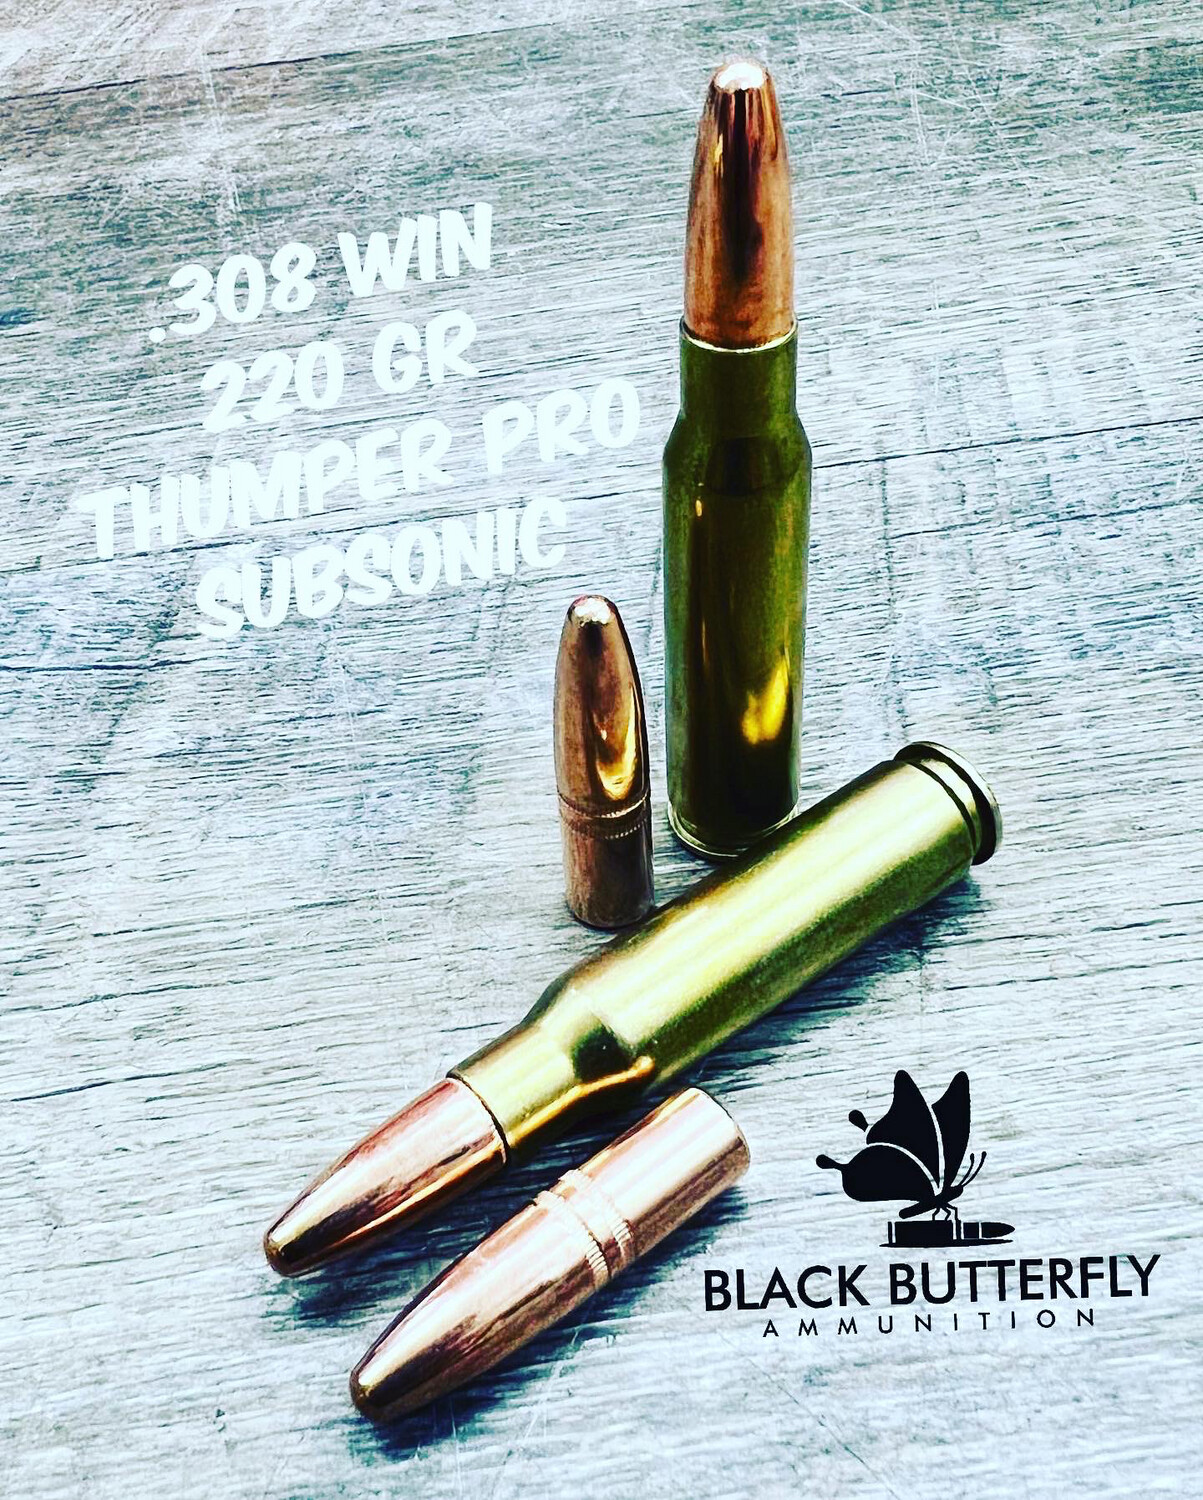 Black Butterfly Ammunition, .308 WIN/7.62x51mm, 220 gr., 5 Rounds, "THUMPER PRO" SUBSONIC for 1:10 Twist 16-16.5" Rifles, SAMPLE PACK